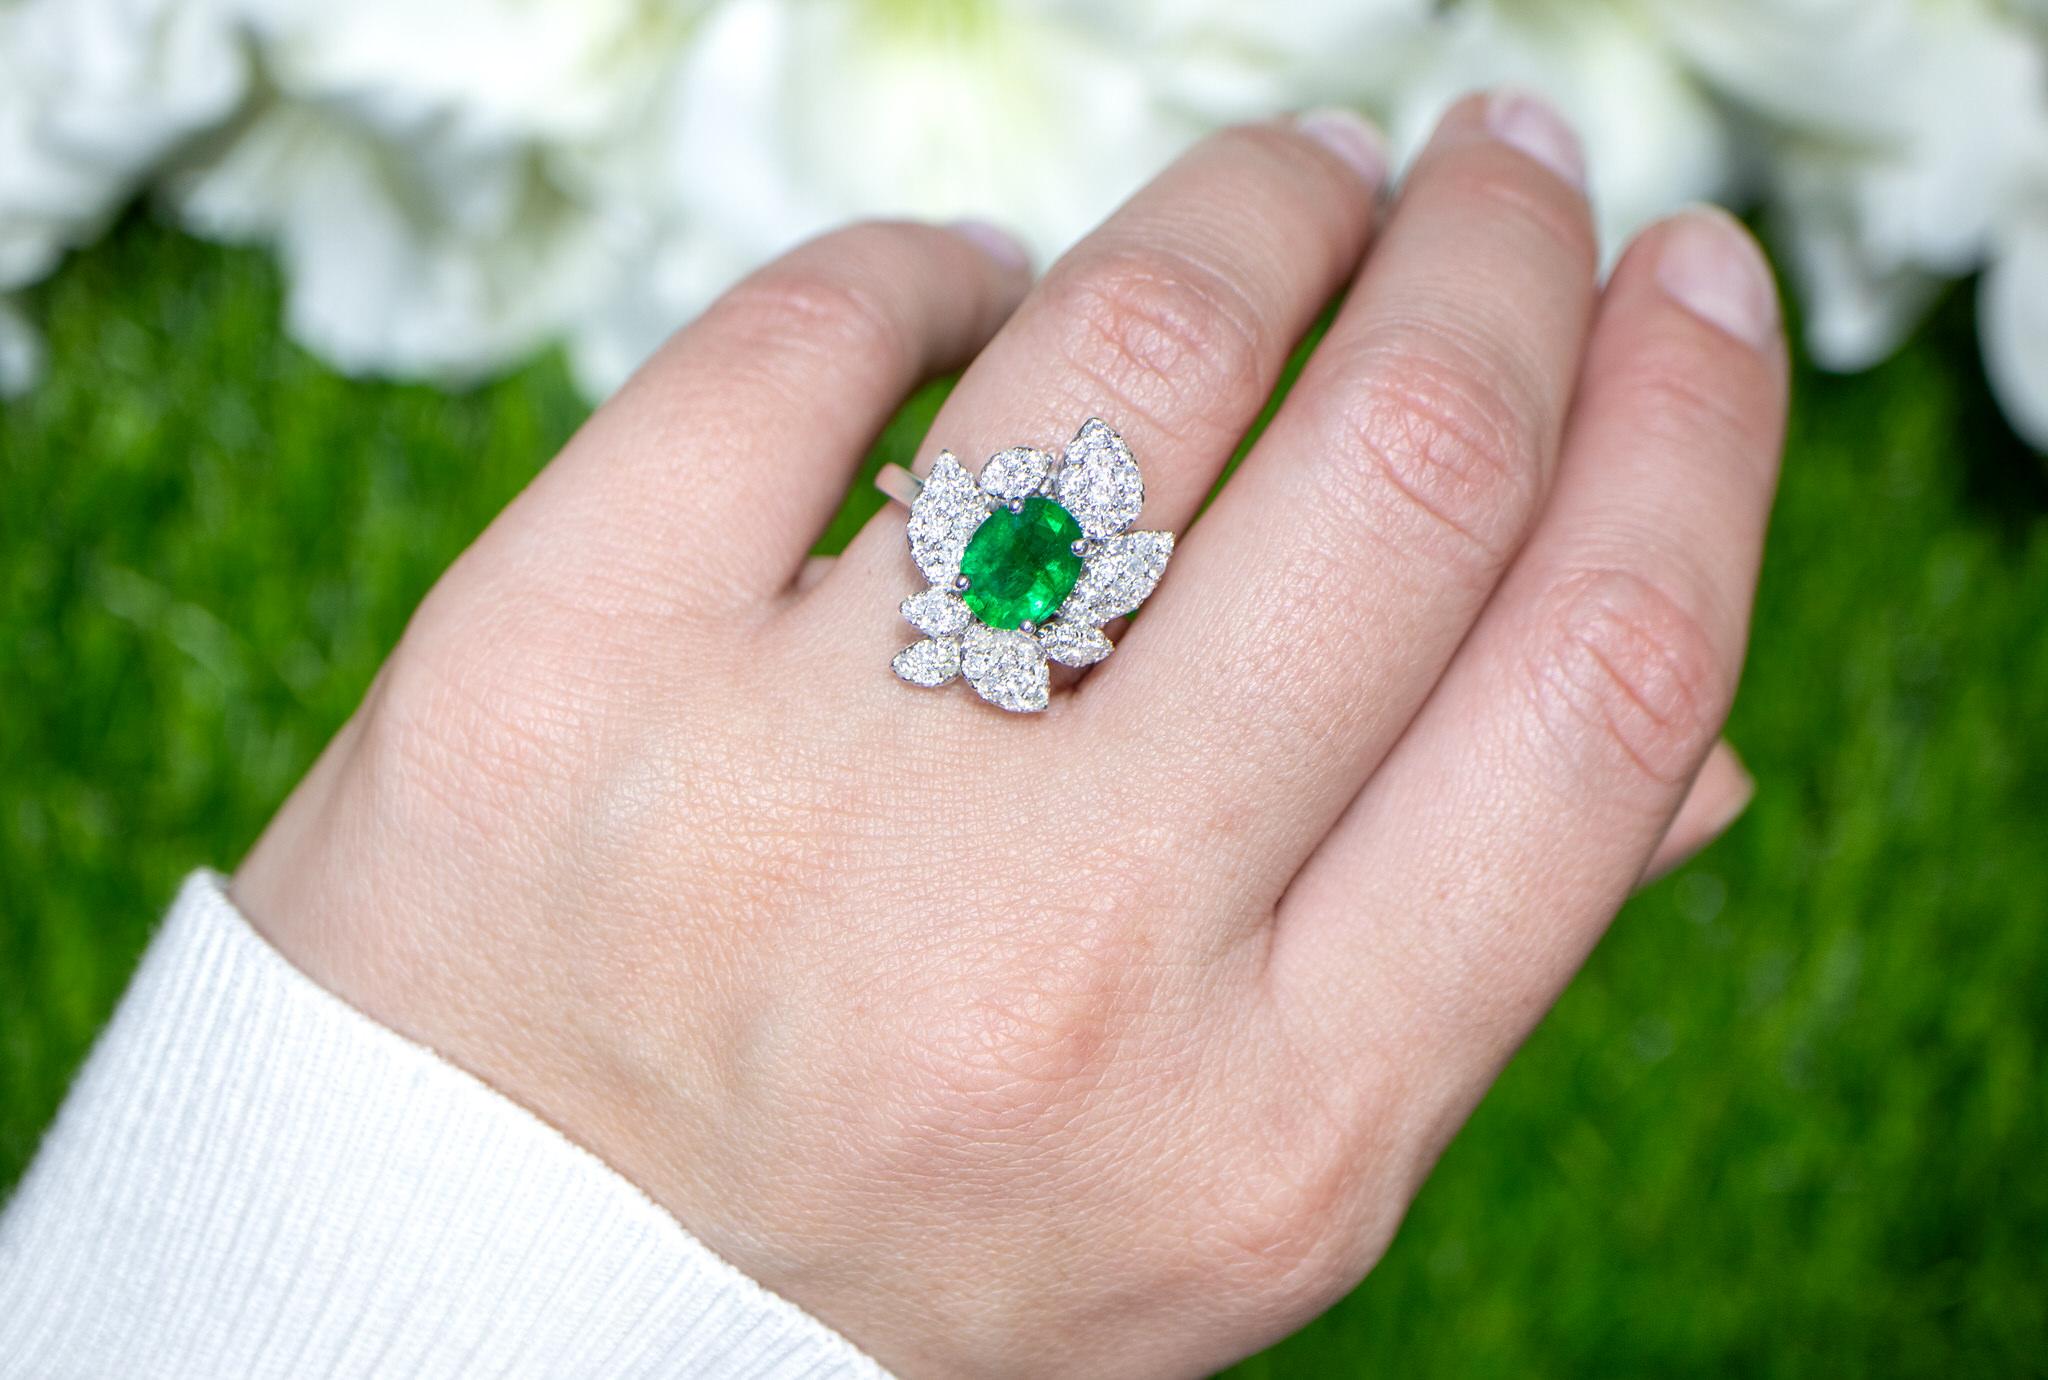 It comes with the Gemological Appraisal by GIA GG/AJP
All Gemstones are Natural
Emerald = 1.54 Carats
Diamonds = 1.07 Carats
Metal: 18K White Gold
Ring Size: 6.5* US
*It can be resized complimentary